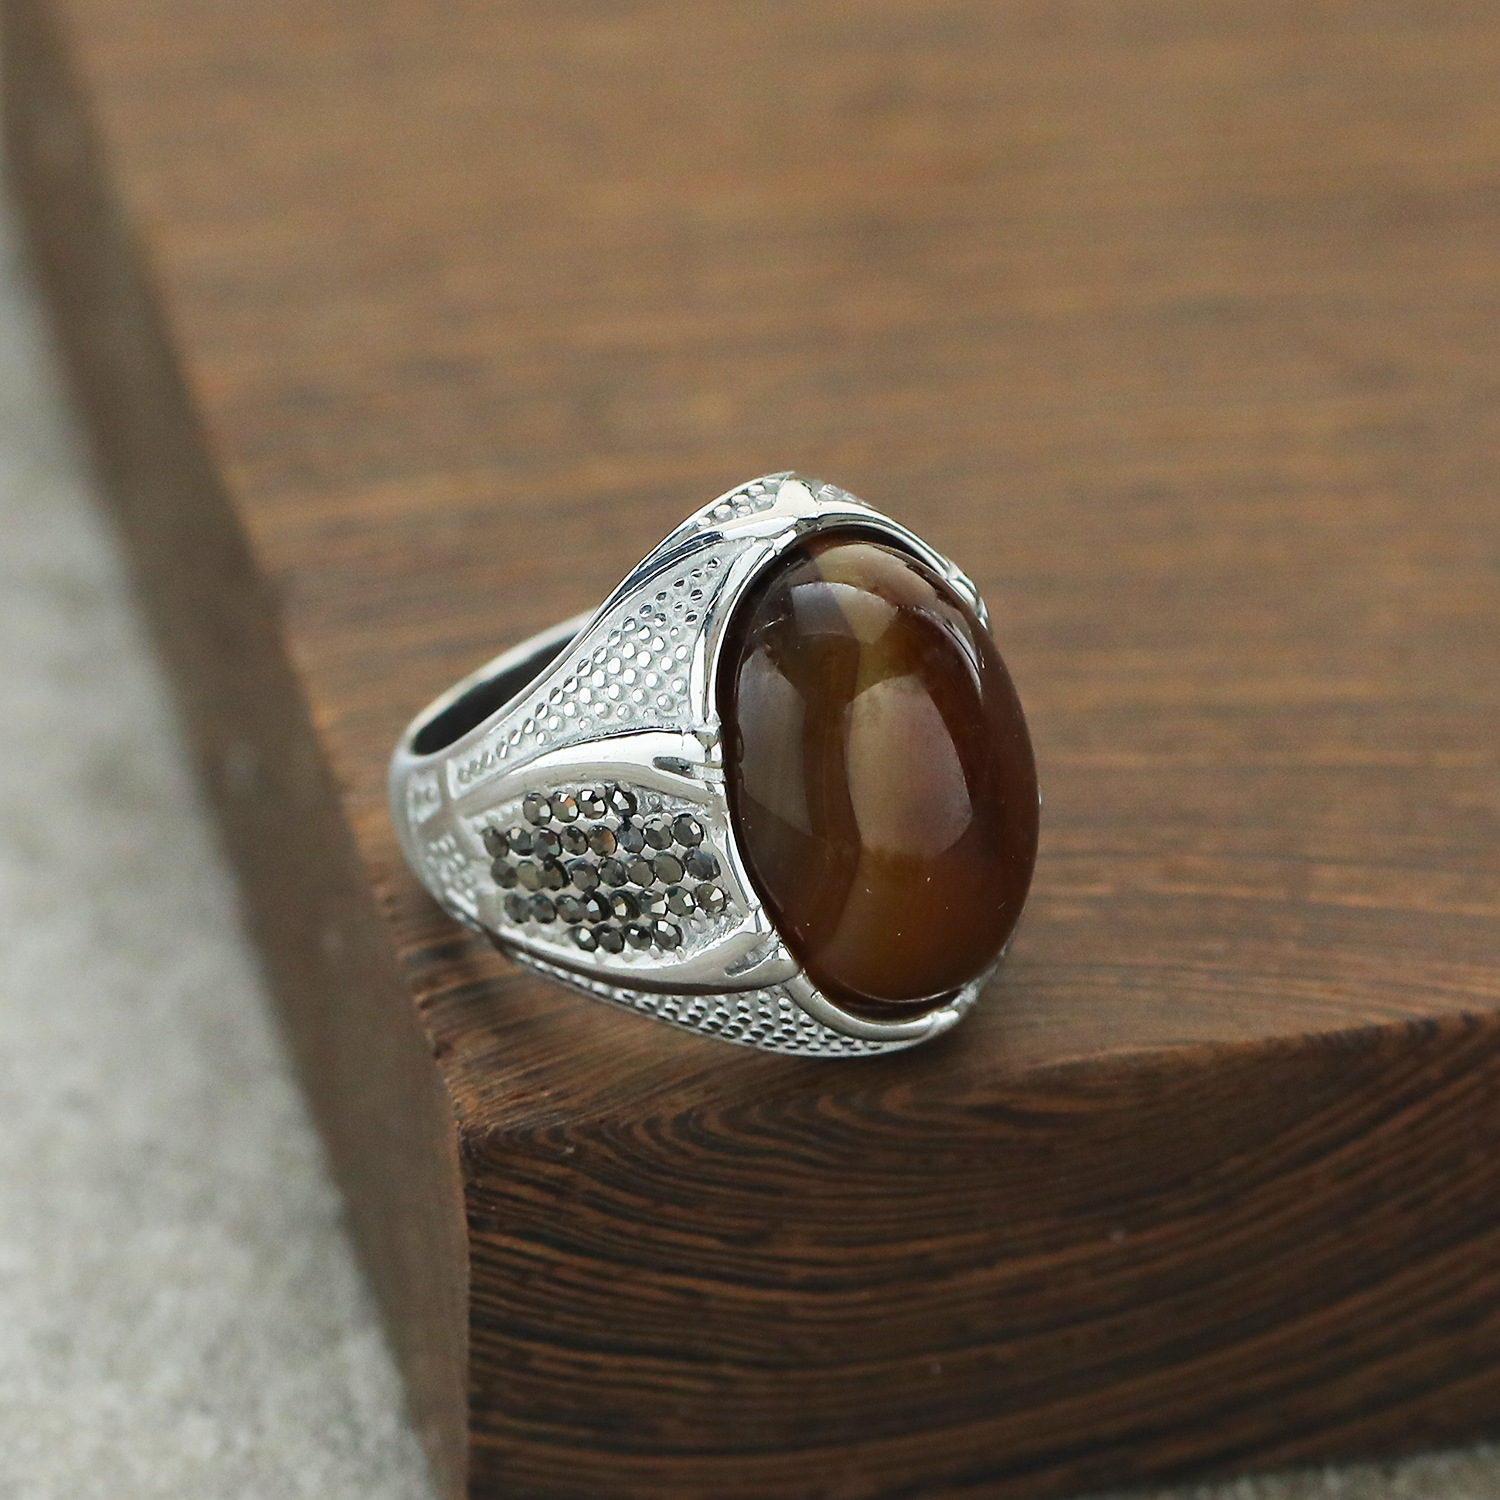 8:Steel color agate